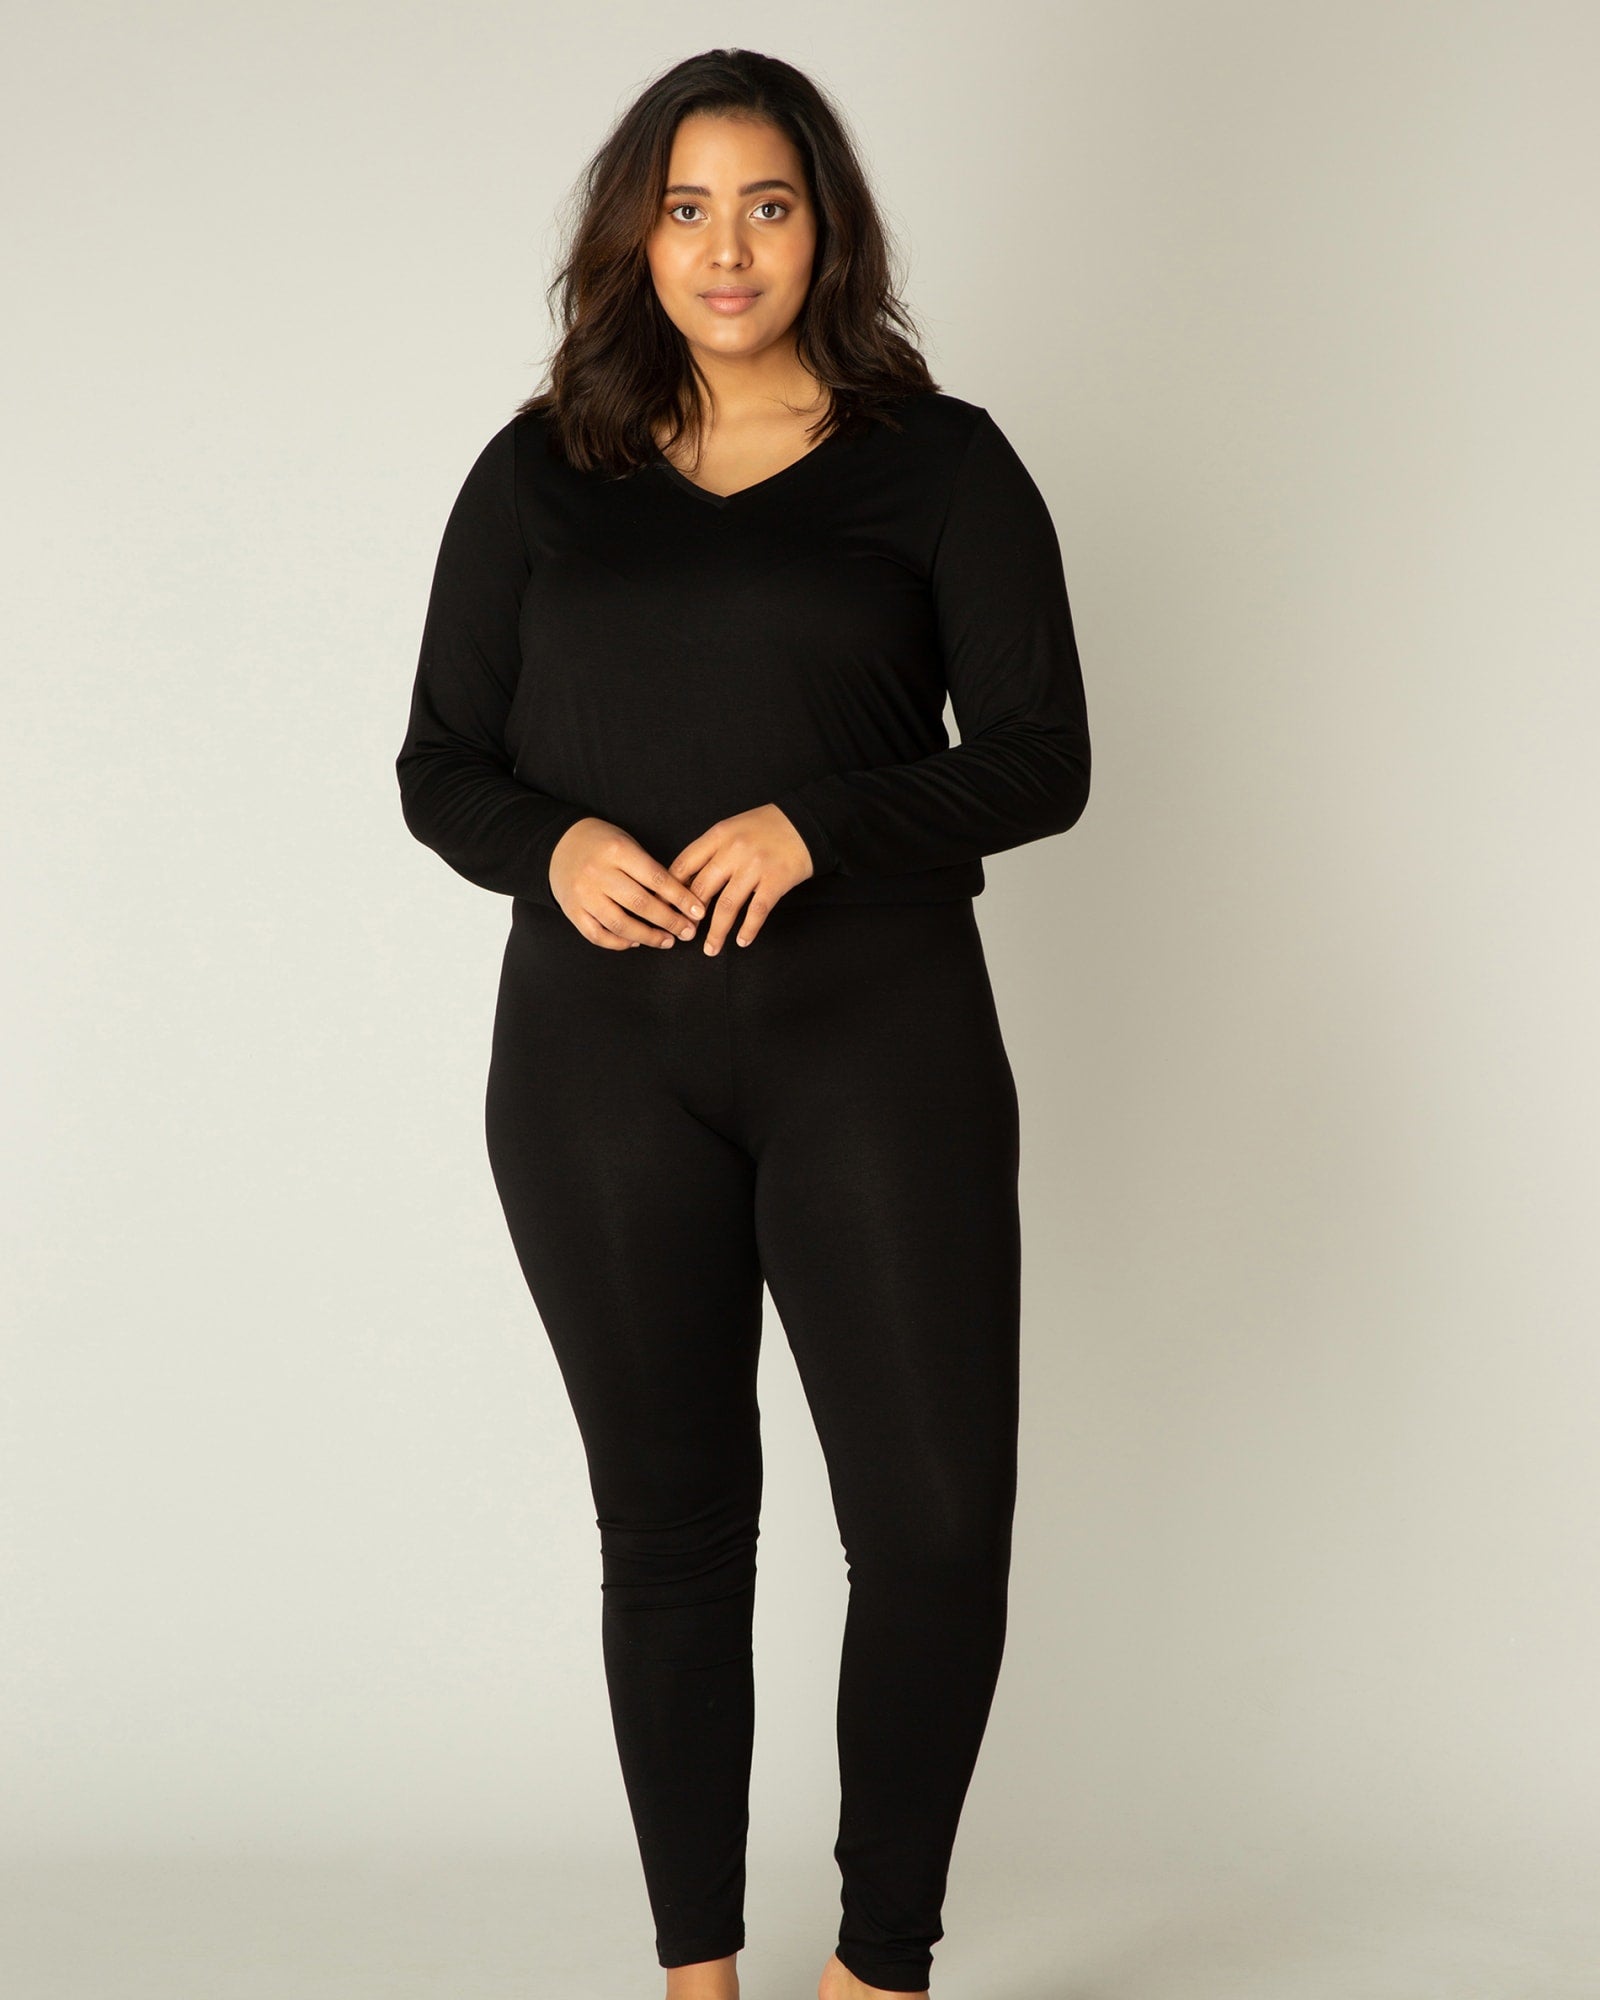  Poetic Justice Plus Size Curvy Women's Stretch Ponte Pull On Moto  Legging Black : Clothing, Shoes & Jewelry